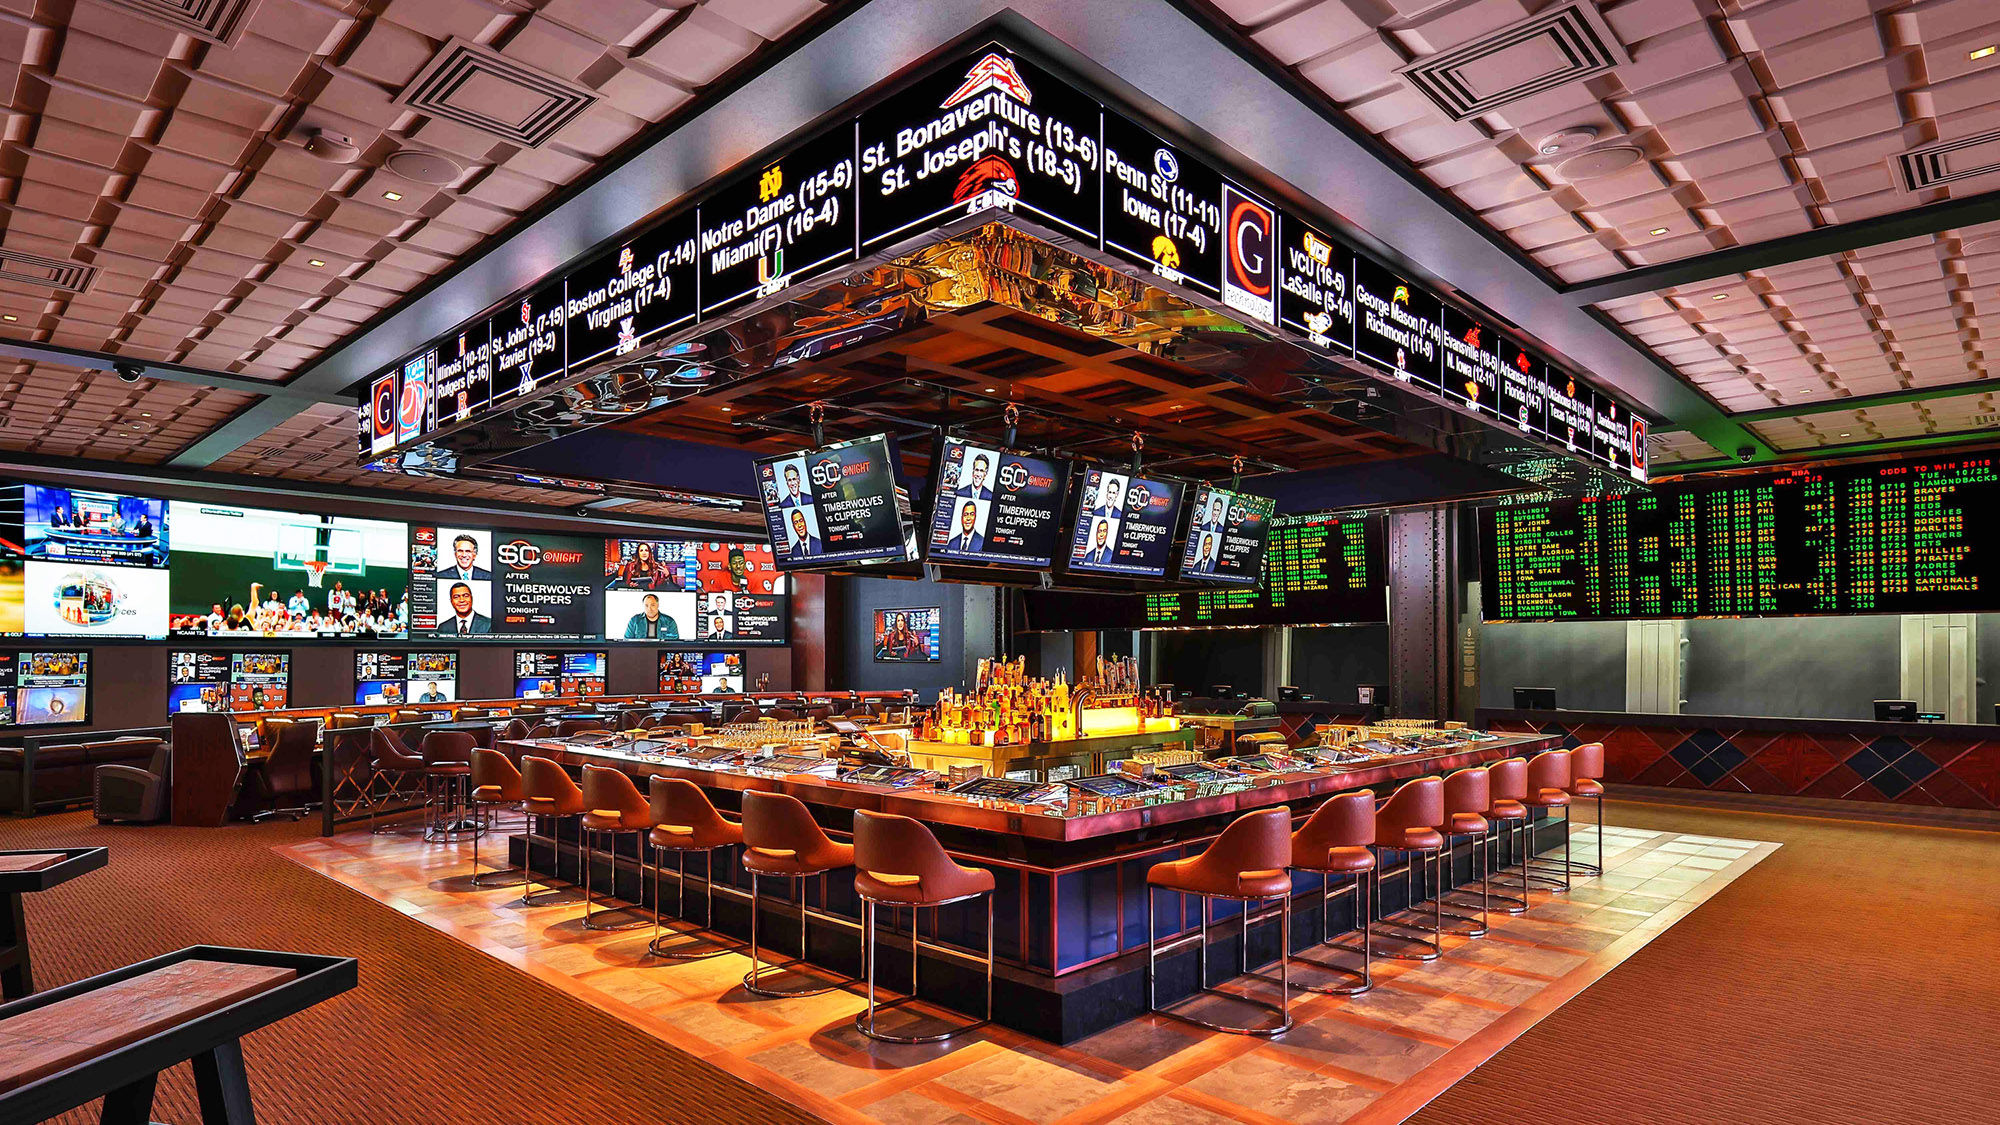 The sports book, now run by William Hill, is expected to become part of BetMGM in the coming months.